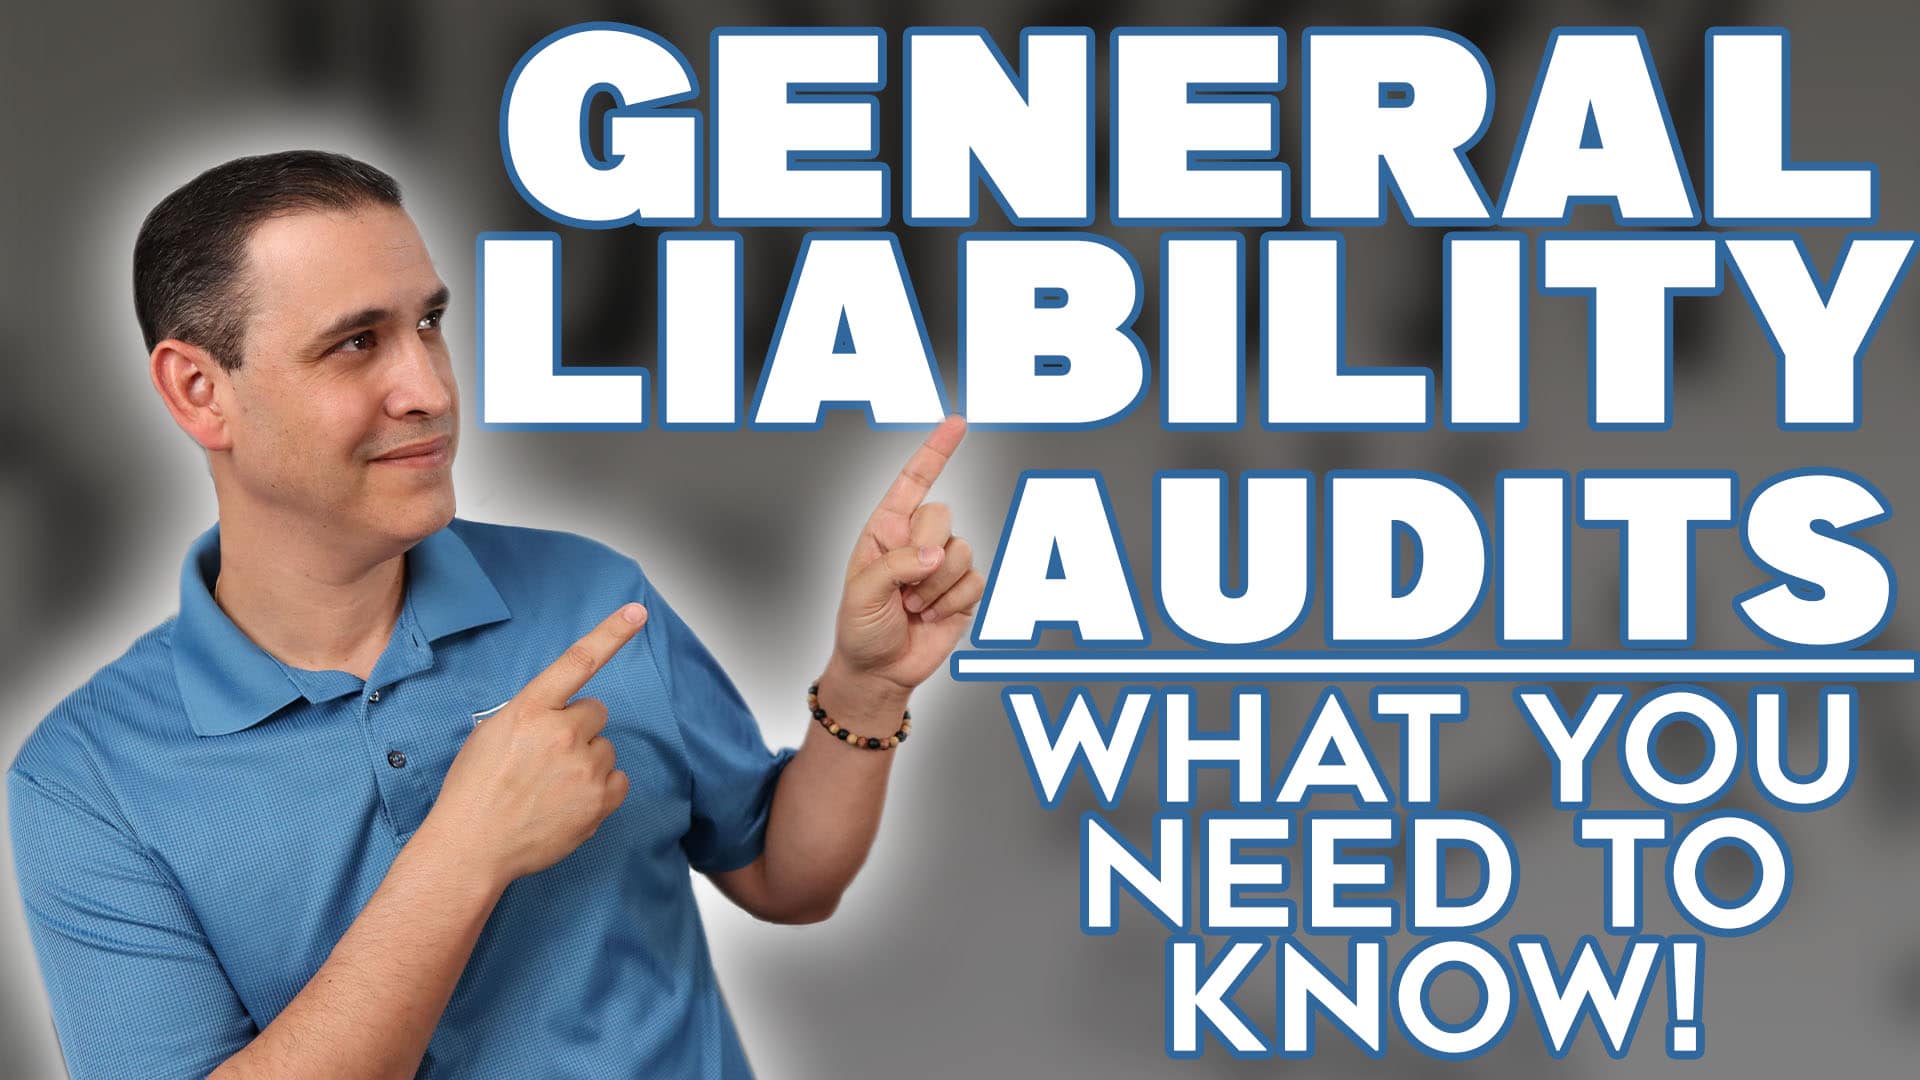 What is a General Liability Audit?